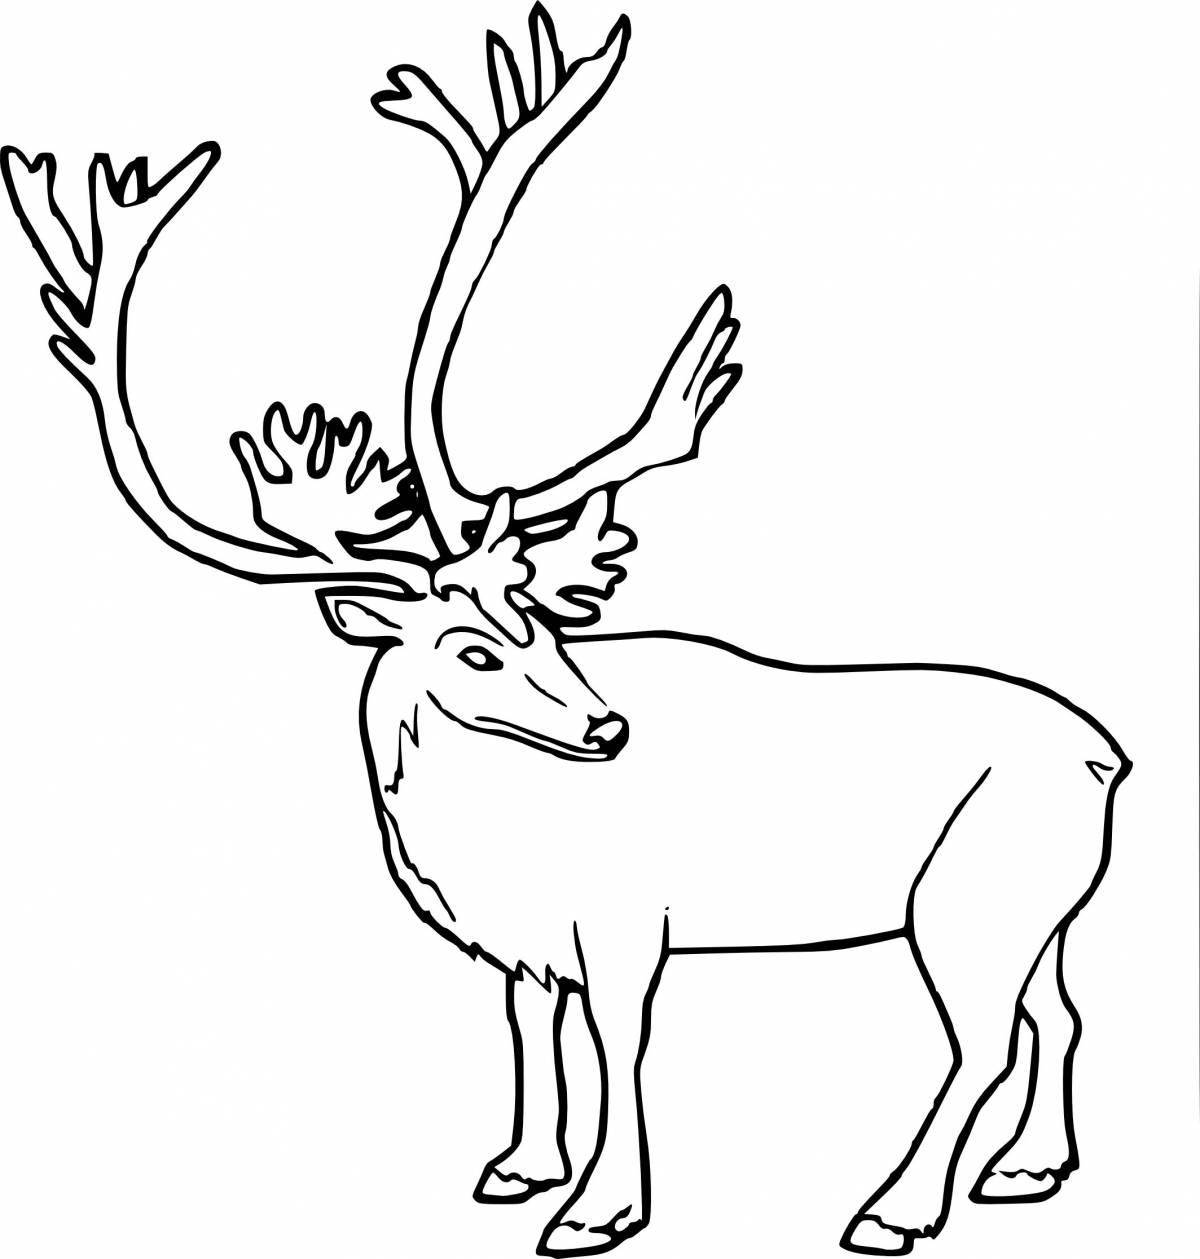 Amazing northern coloring book for kids